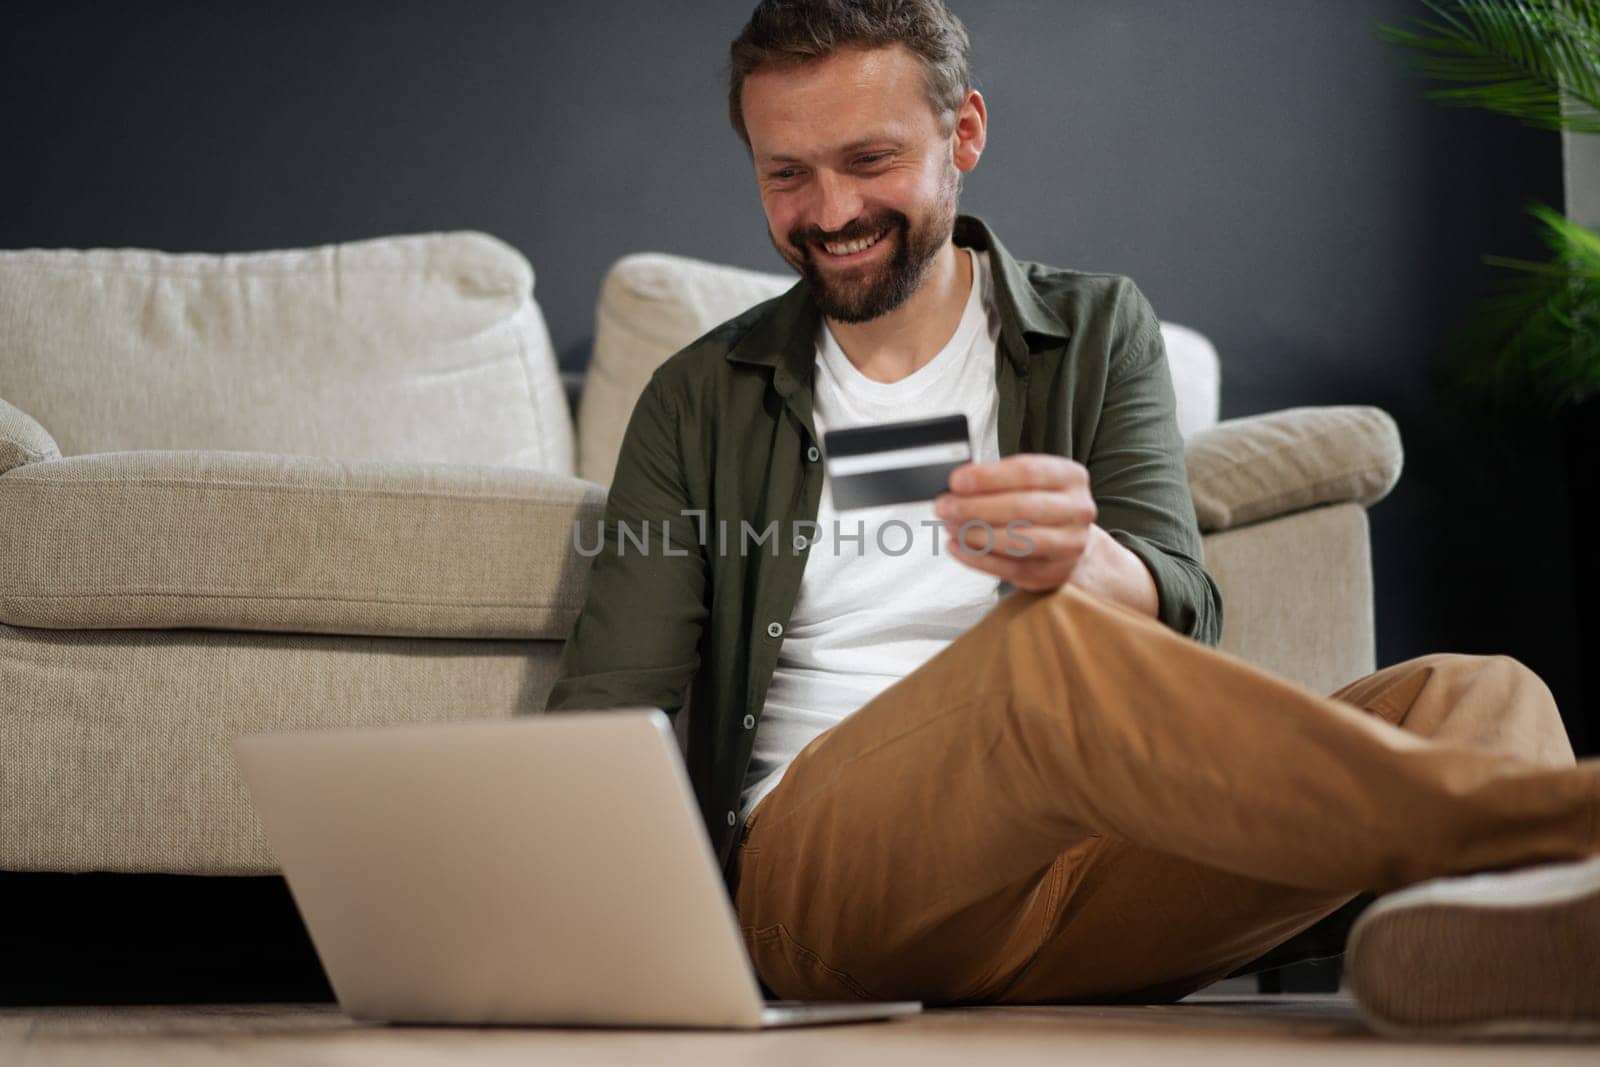 Happy, smiling customer sitting on floor next to sofa while shopping online using credit card for online auction. Concept of online payment systems, e-commerce, and online shopping in modern and technological setting. High quality photo